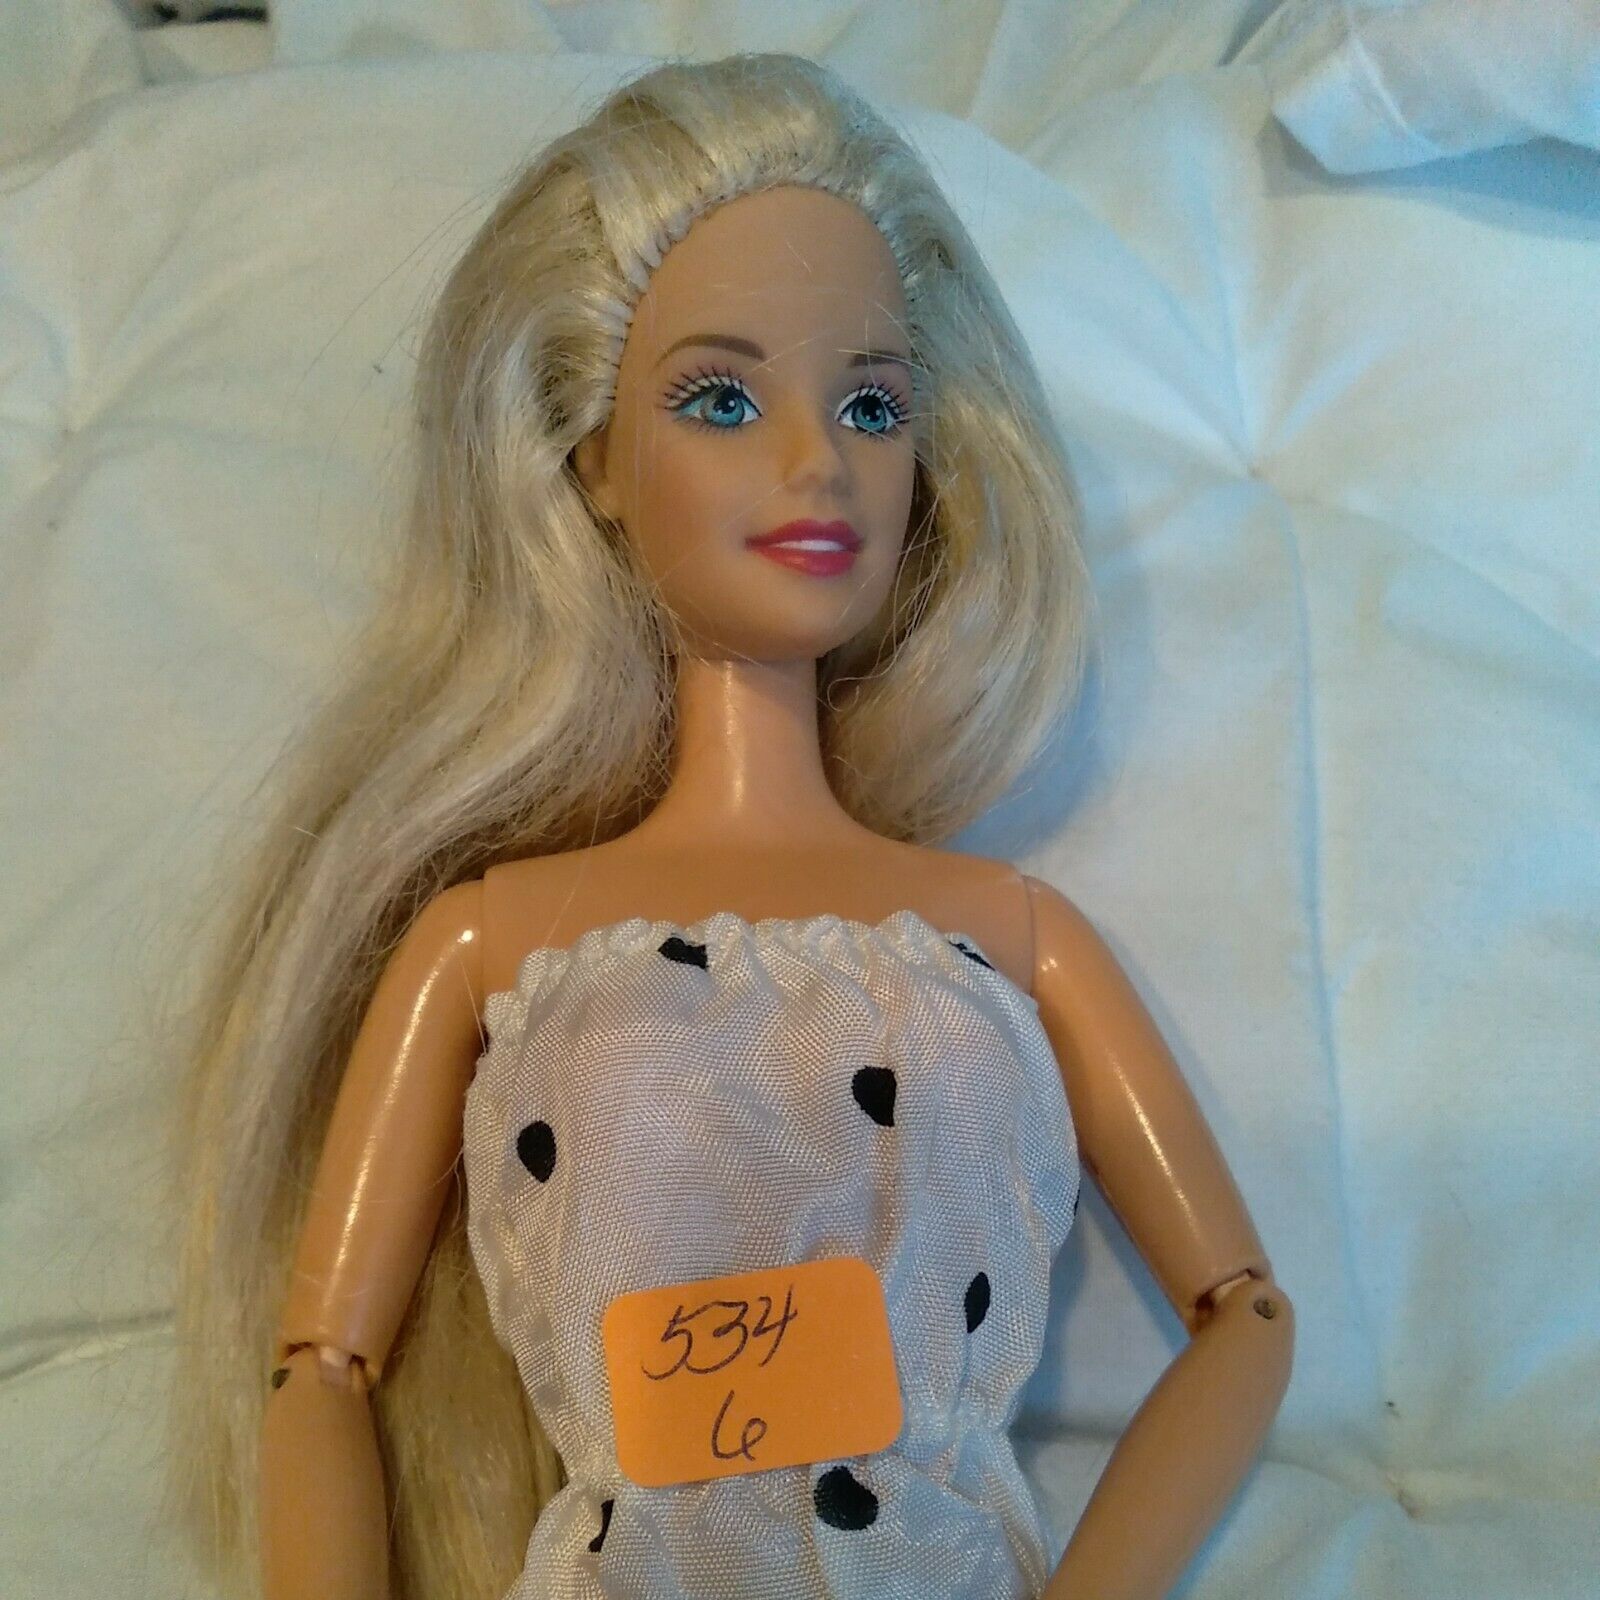 1999 Barbie Doll Articulate Arms, Legs Rubber Bend #534-6